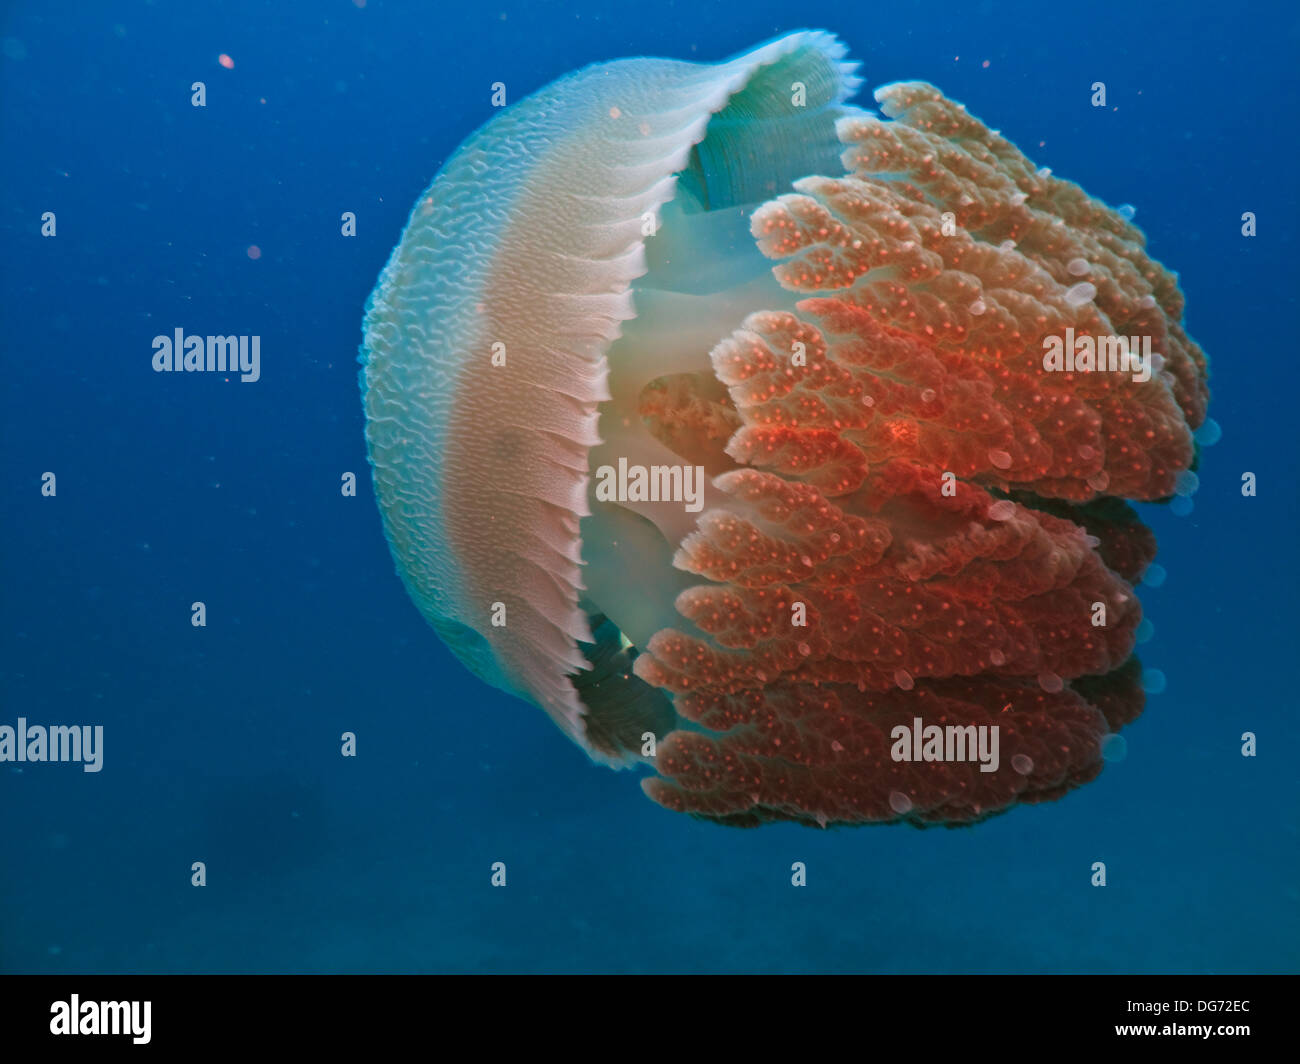 Closeup of Bioluminescent Jelly fish floating alone on Great Barrier Reef Australia Stock Photo